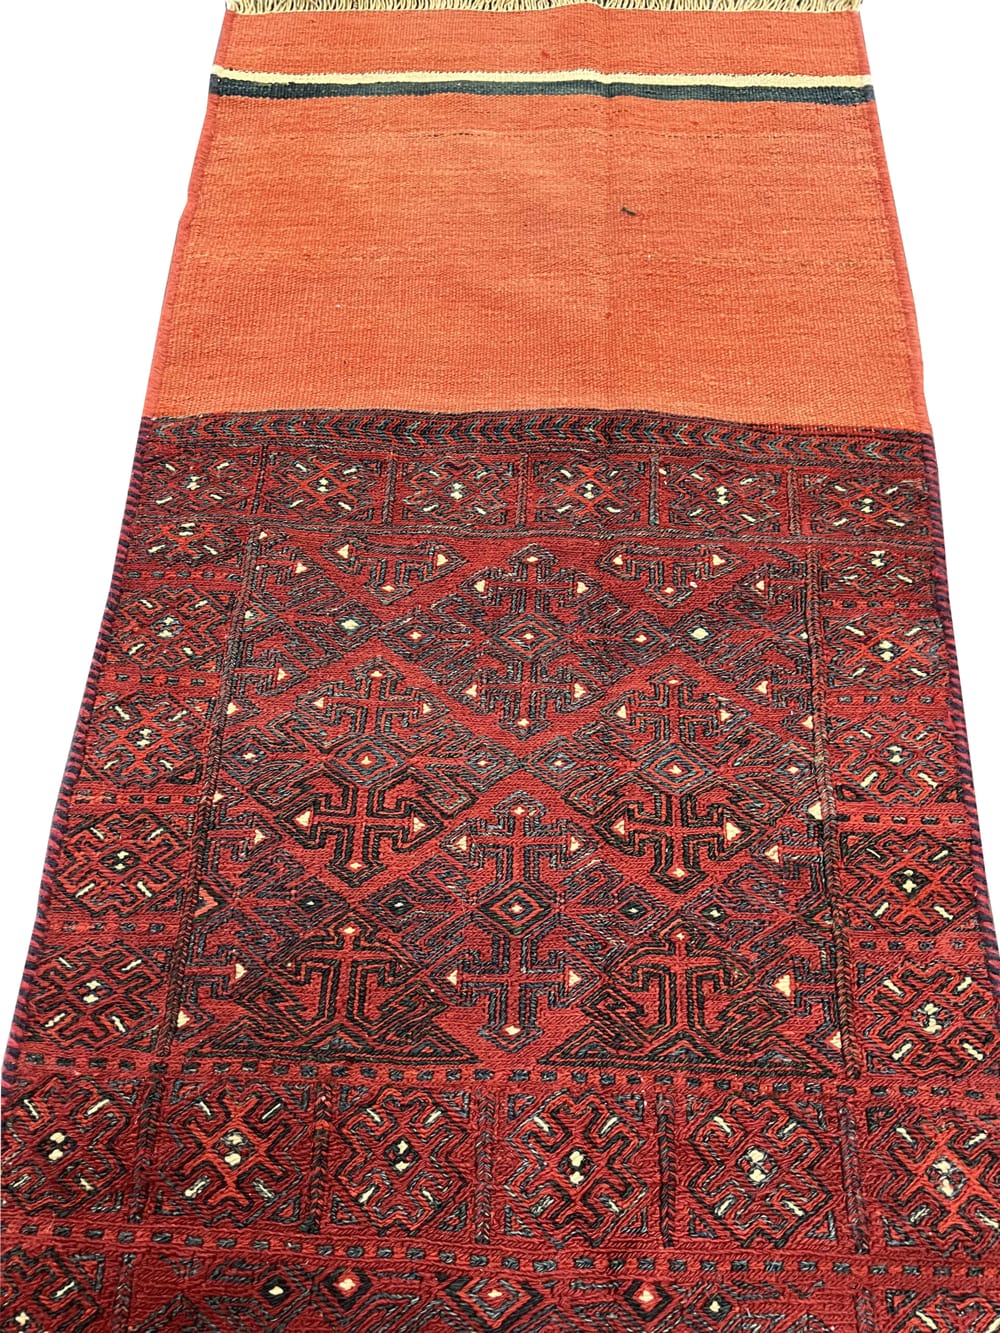 Rug# 10465, Azarbaiejan Sumak, Nomadic weave Khorjeen face or small Tached, , local wool, circa 1940, rare, Size 192x58 cm (3)